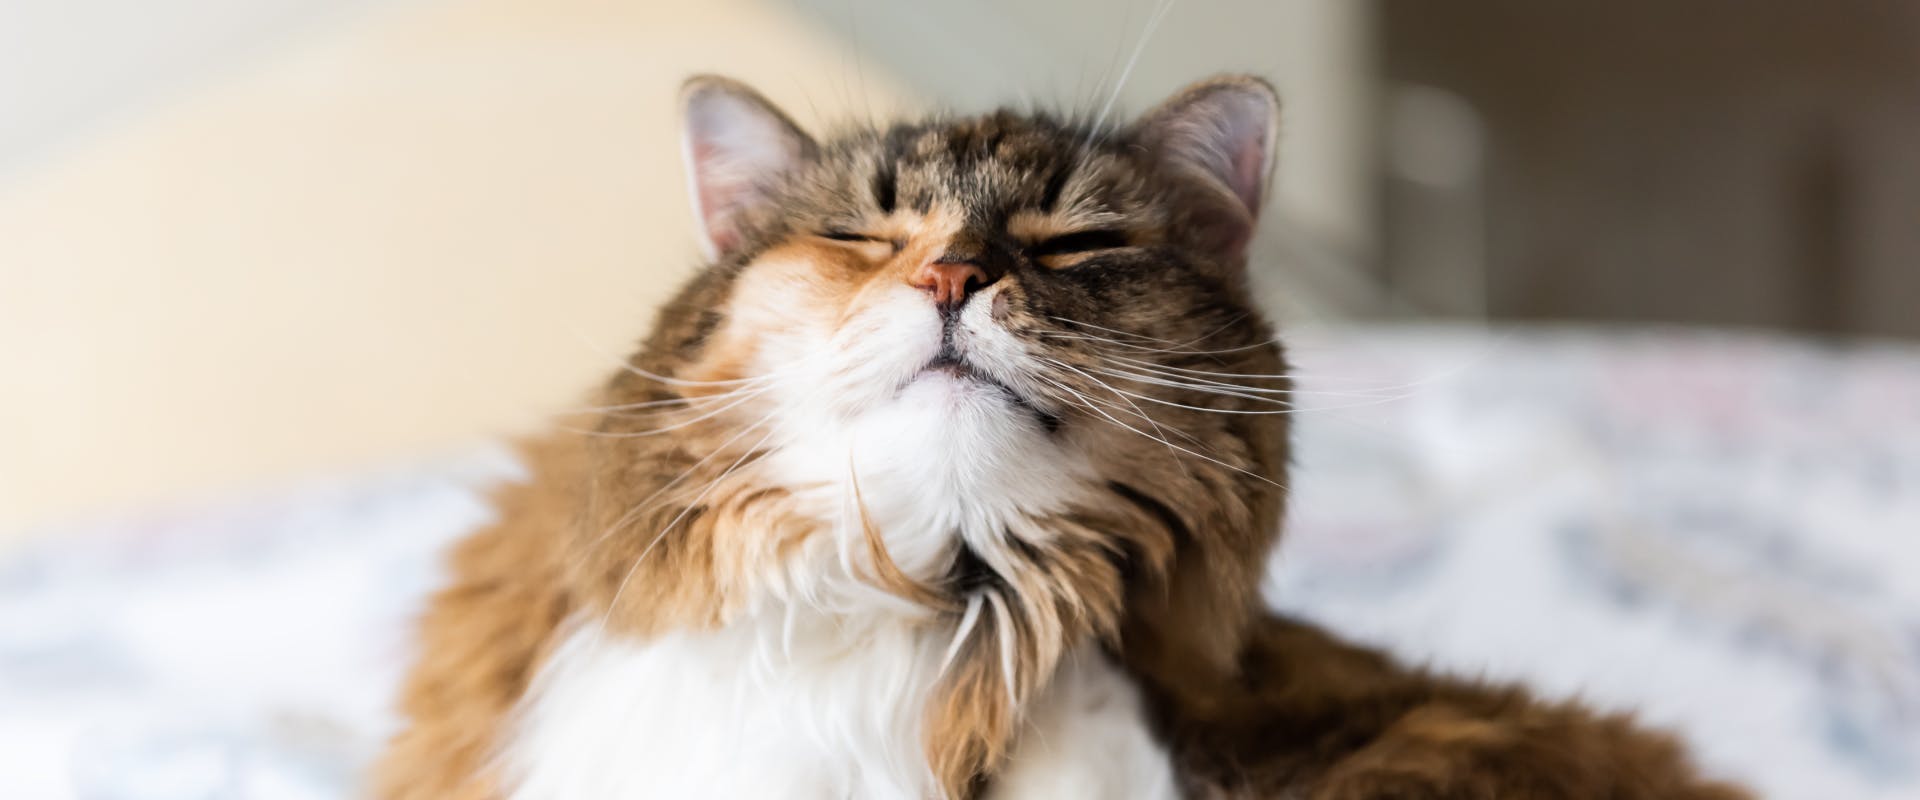 a long haired tabby cat sitting on a bed scratching its neck with its eyes closed